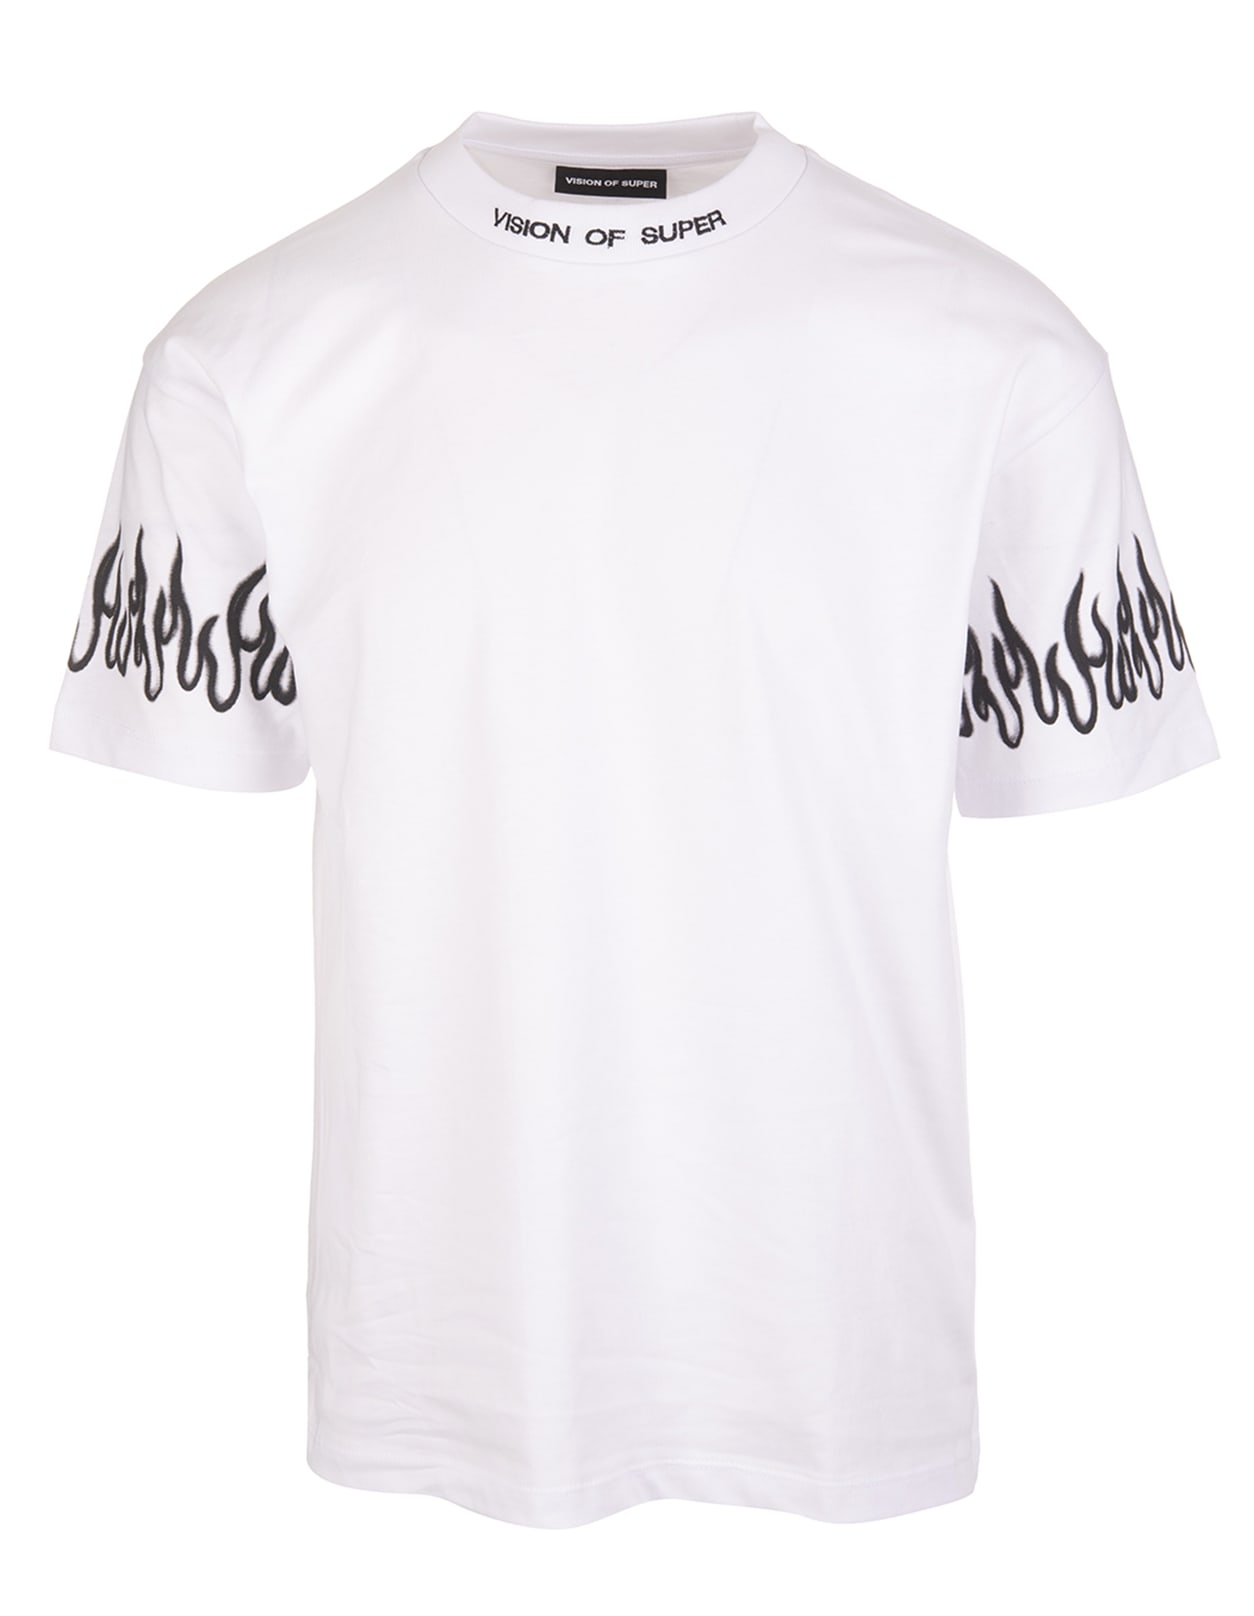 Vision of Super White Unisex T-shirt With Logo And Black Spray Flames Print